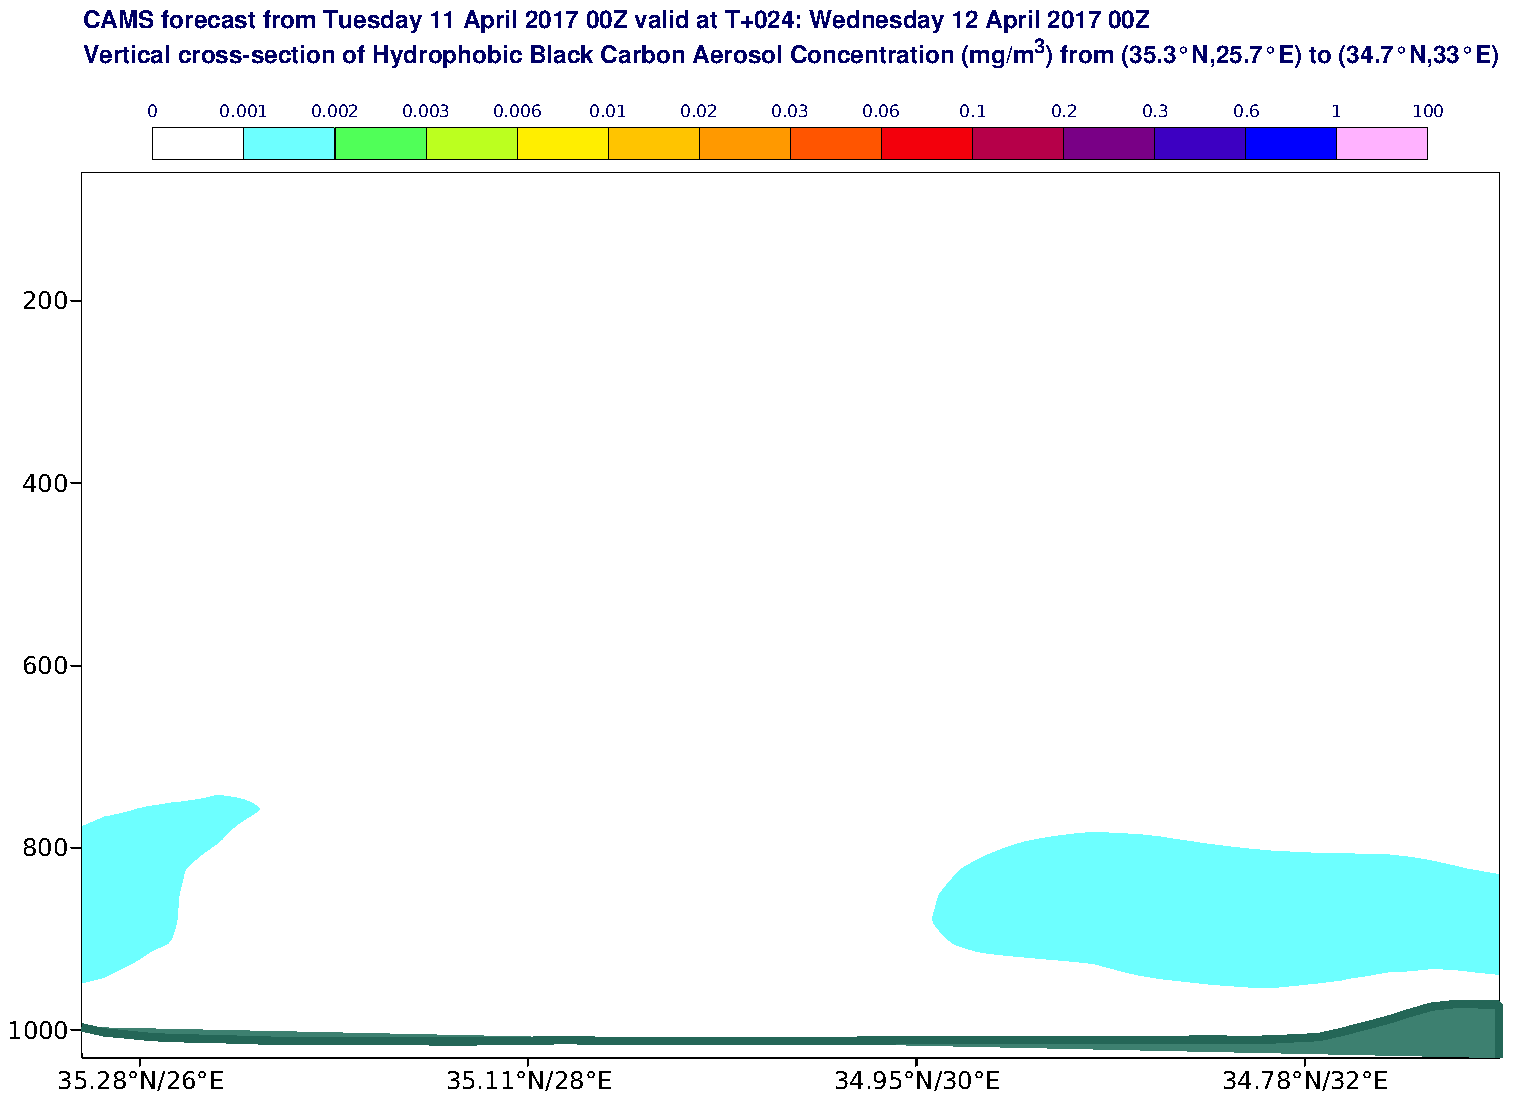 Vertical cross-section of Hydrophobic Black Carbon Aerosol Concentration (mg/m3) valid at T24 - 2017-04-12 00:00